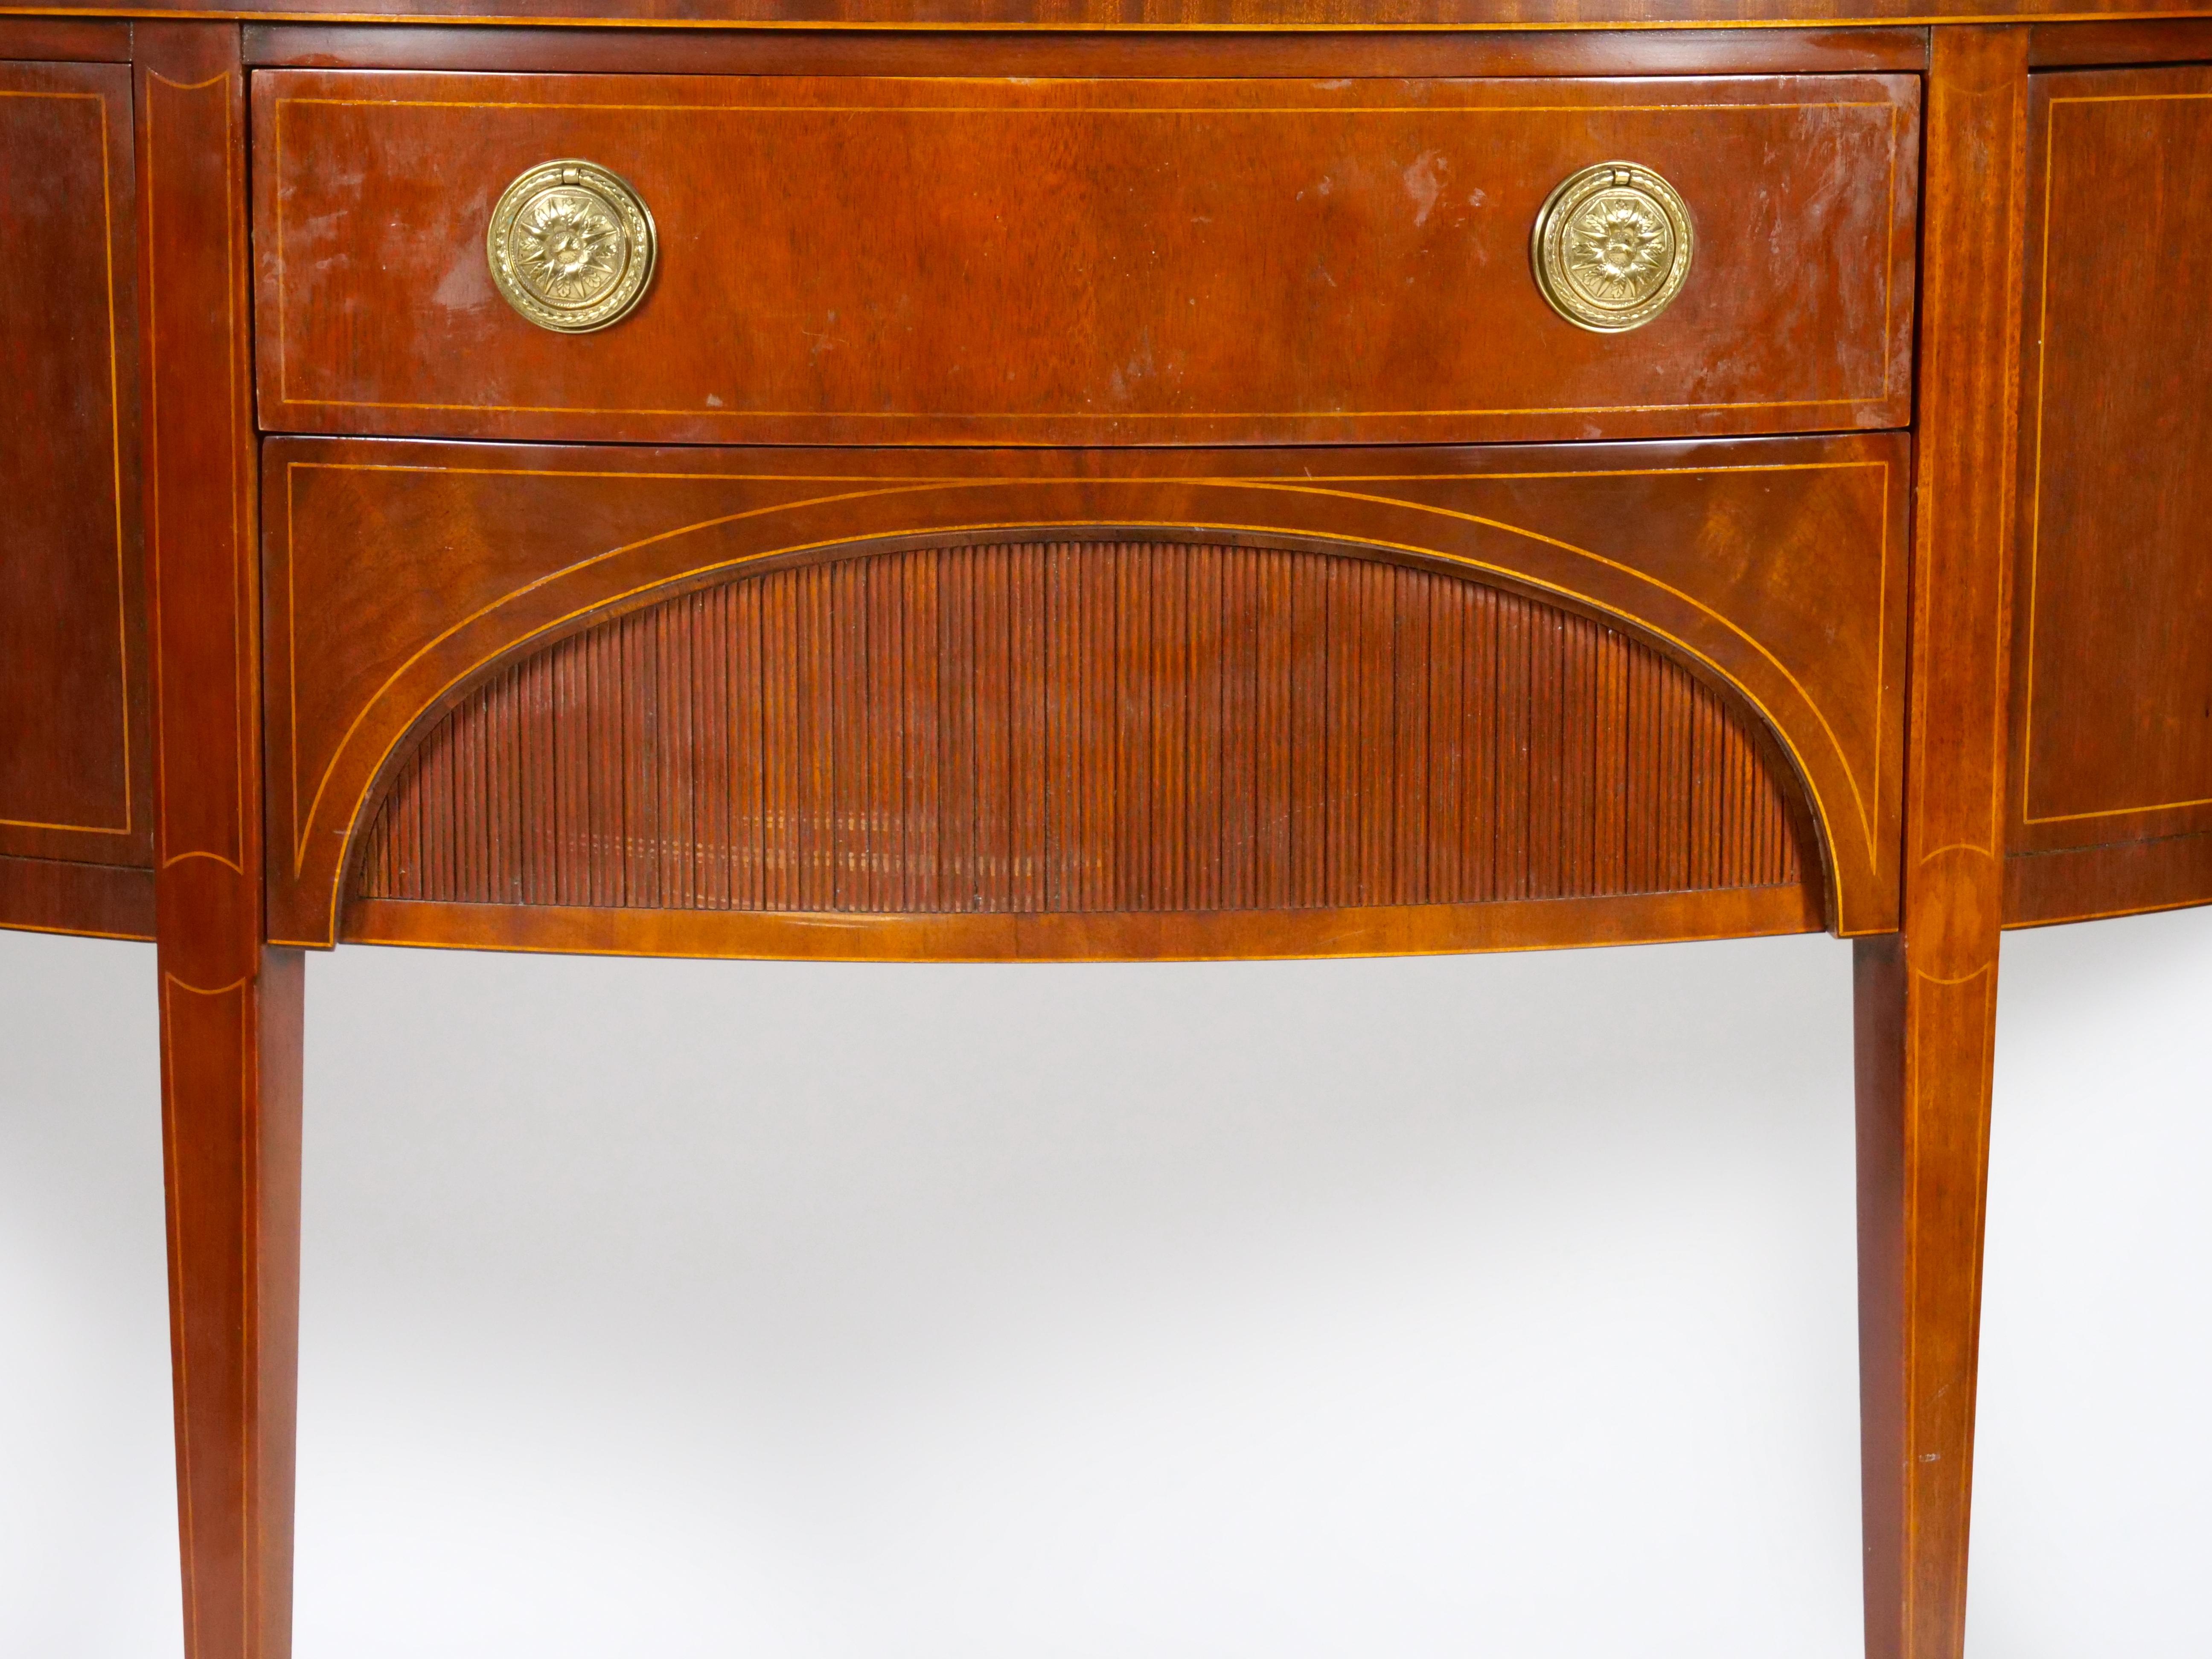 American Federal Style Mahogany Inlaid Decorated Credenzas / Sideboard For Sale 4